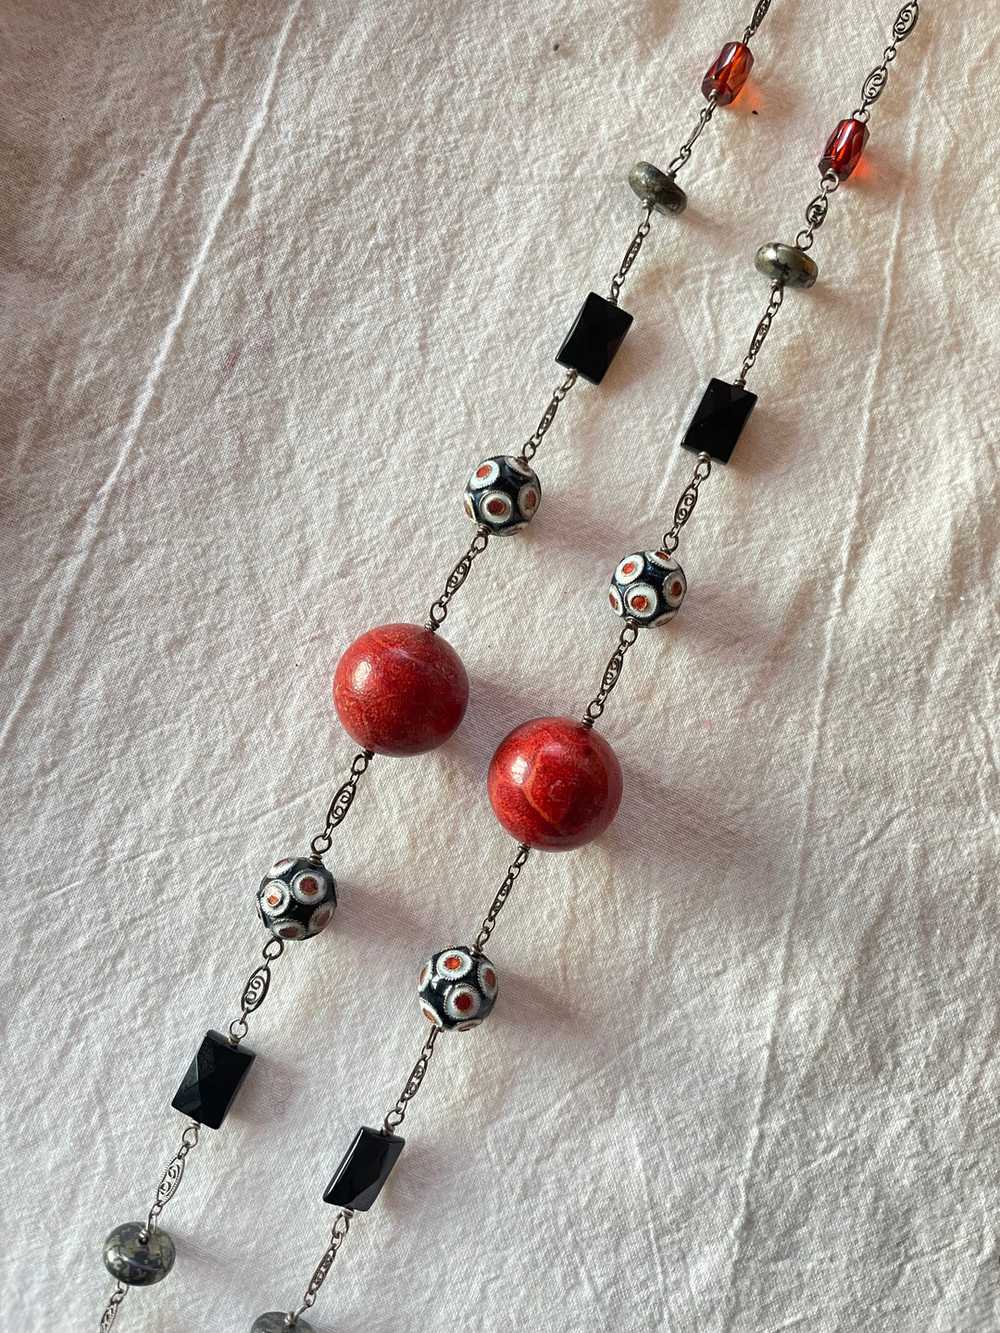 Liza Shtromberg Silver, Onyx and Cinnabar Necklace - image 2